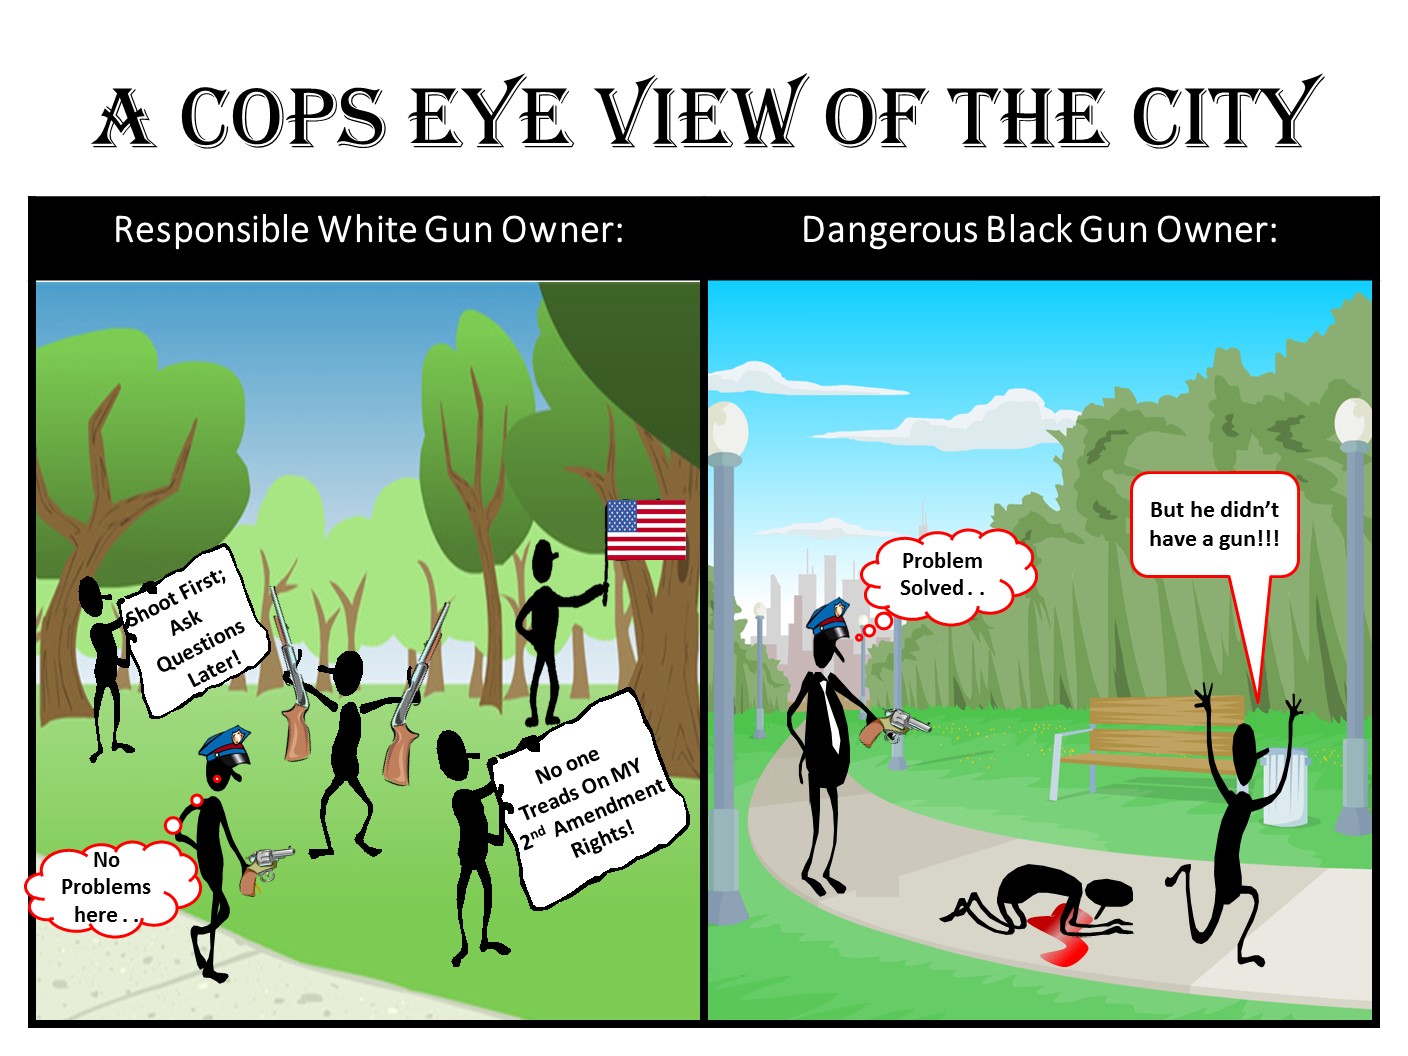 "A Cop's View of the City." 